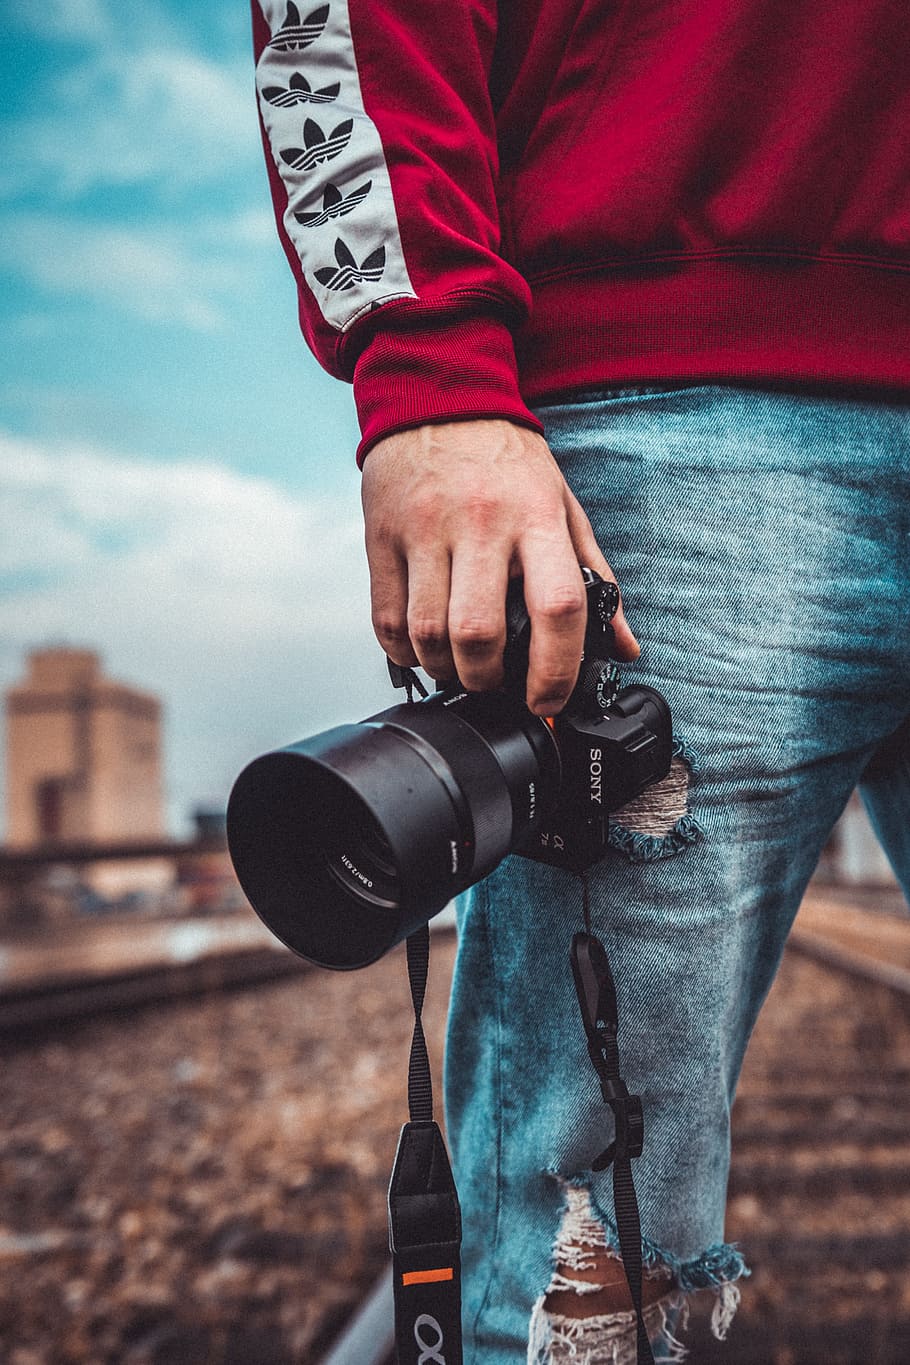 1000 Camera Wallpaper Pictures  Download Free Images on Unsplash